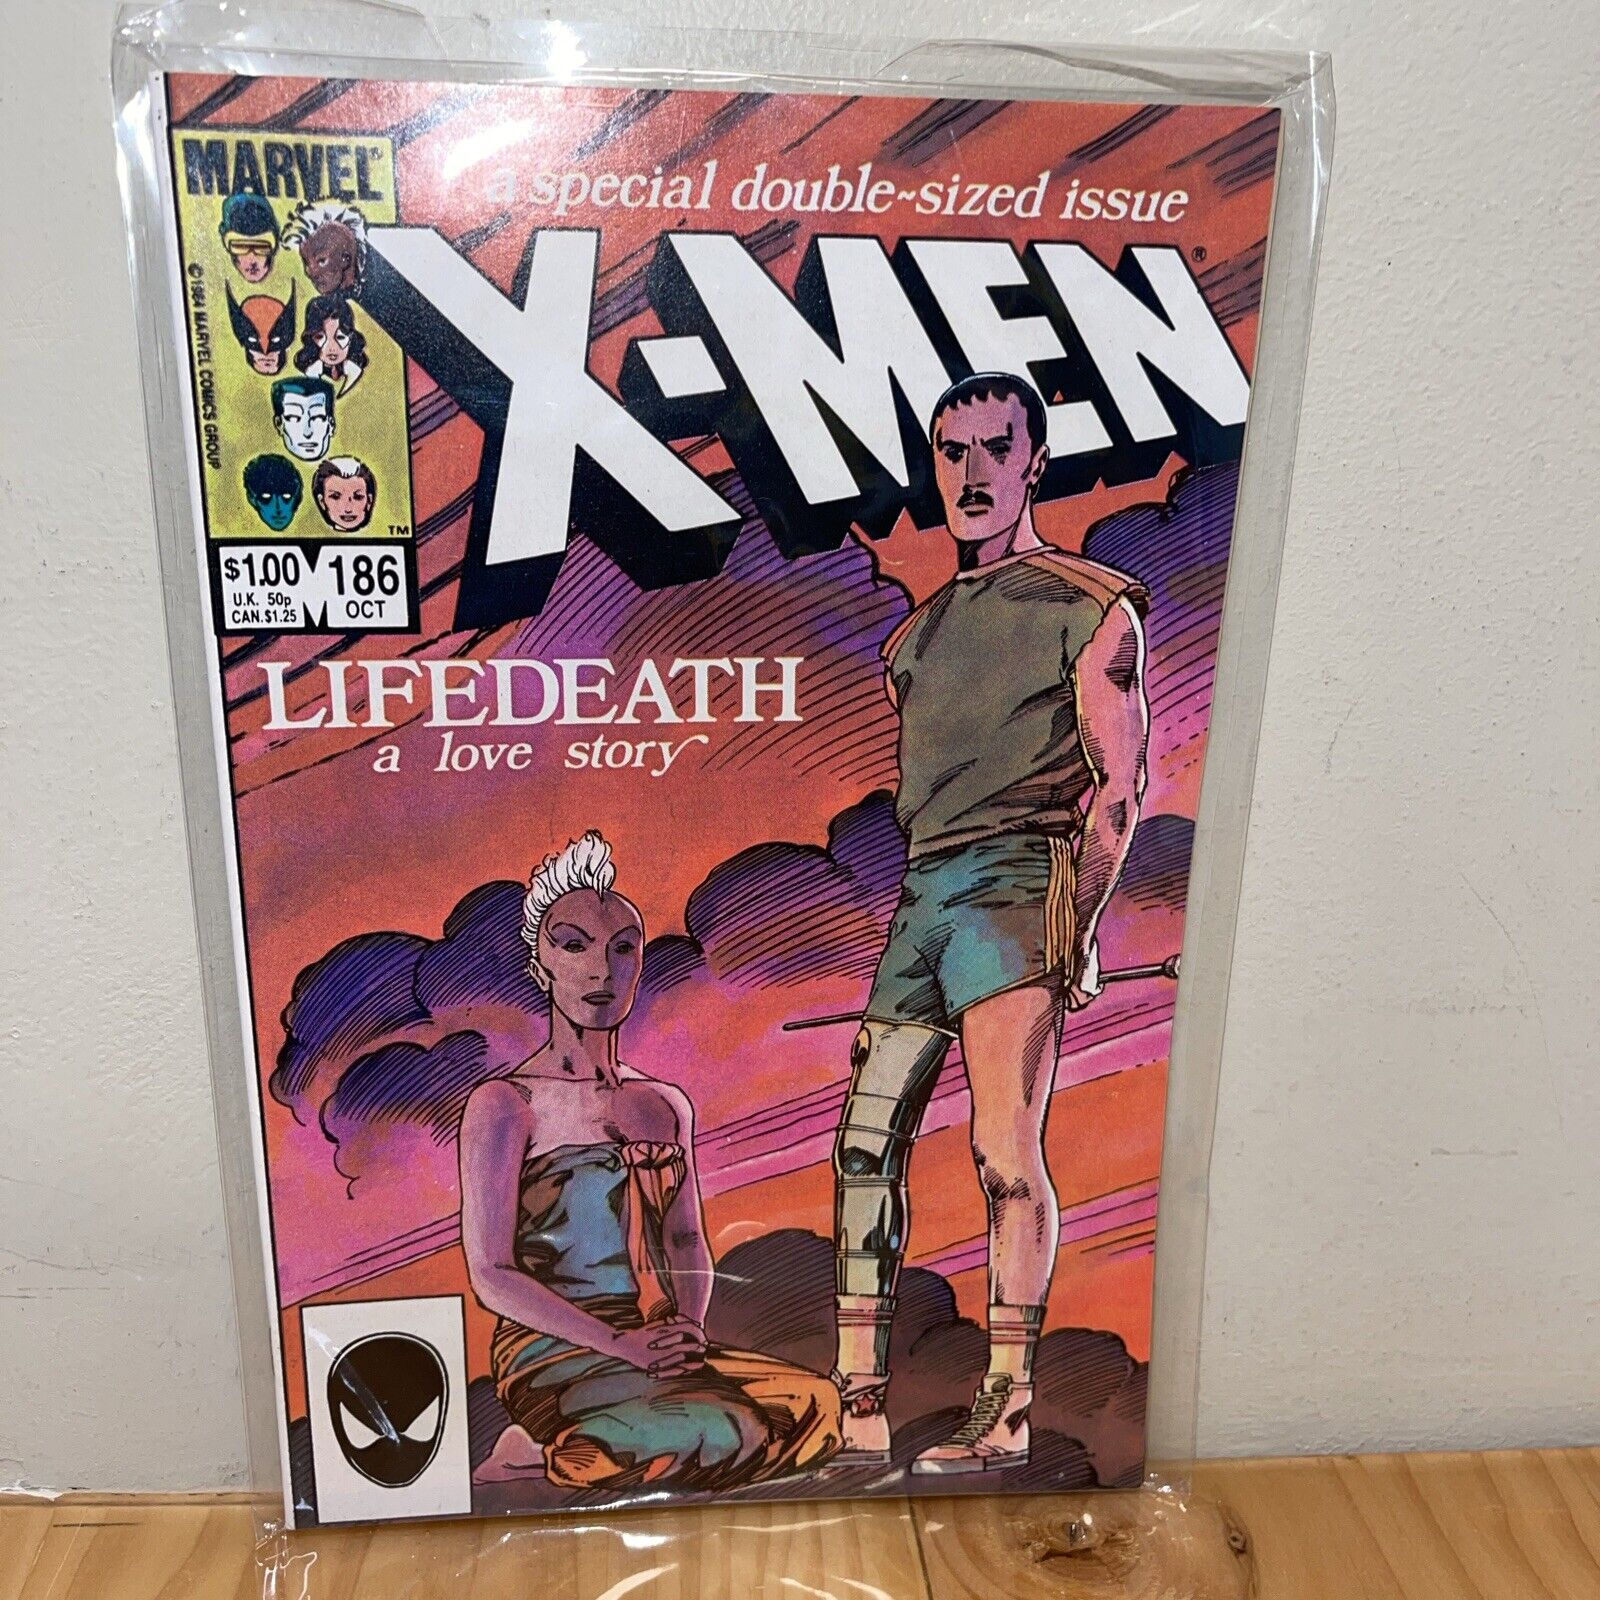 X-Men Special Double Sized #186. October 1984, Life Death, A Love Story